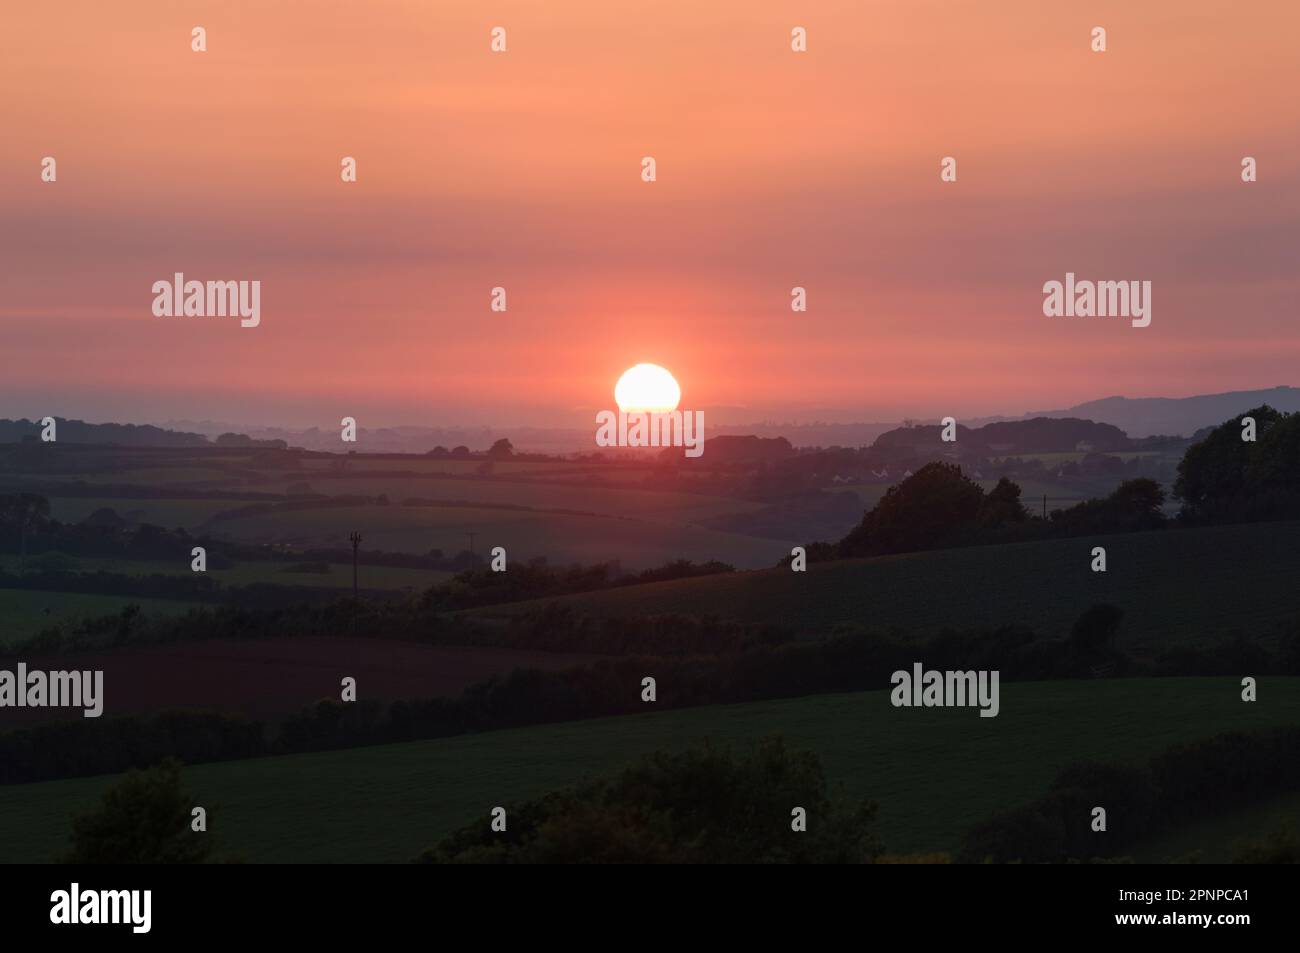 Sunsetting over the countryside of the Lizard Peninsula in Cornwall. The warm red sun setting over the English countryside on a summer day Stock Photo